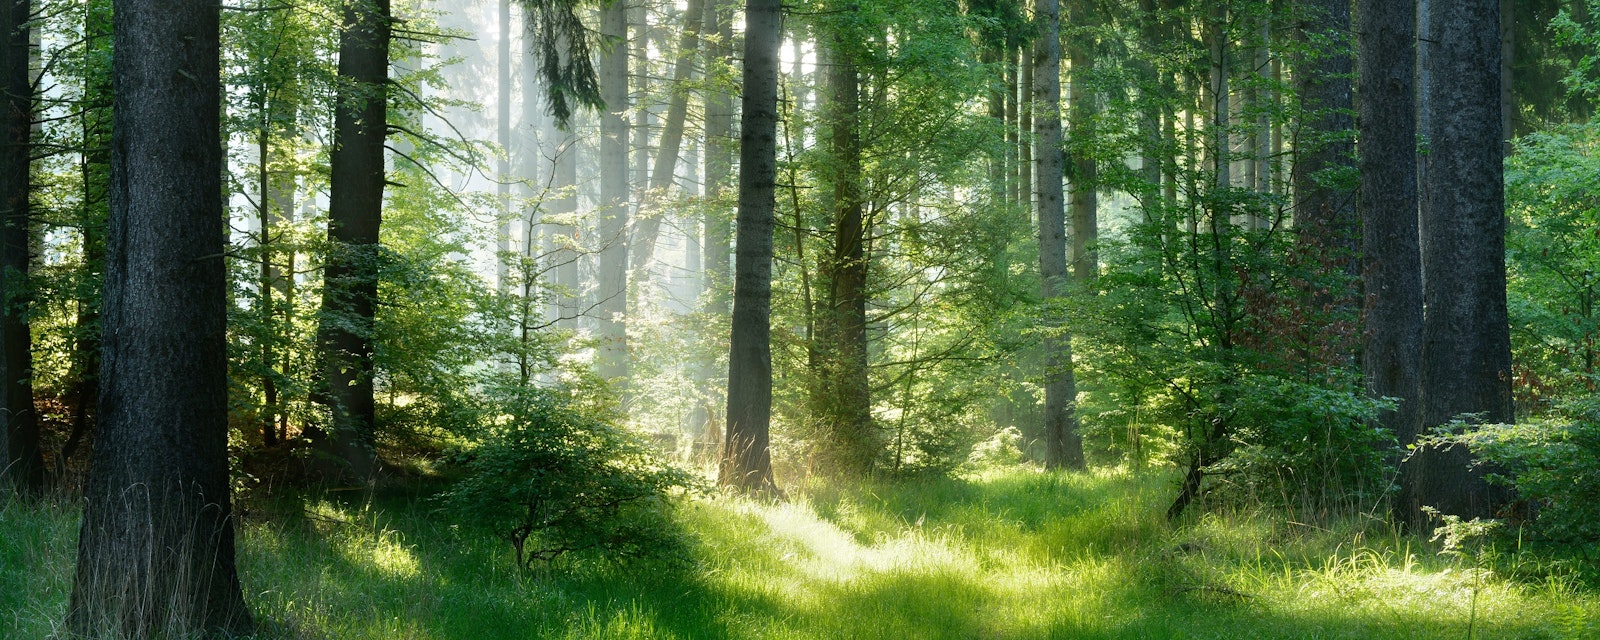 Natural,Forest,Of,Spruce,Trees,,Sunbeams,Through,Fog,Create,Mystic